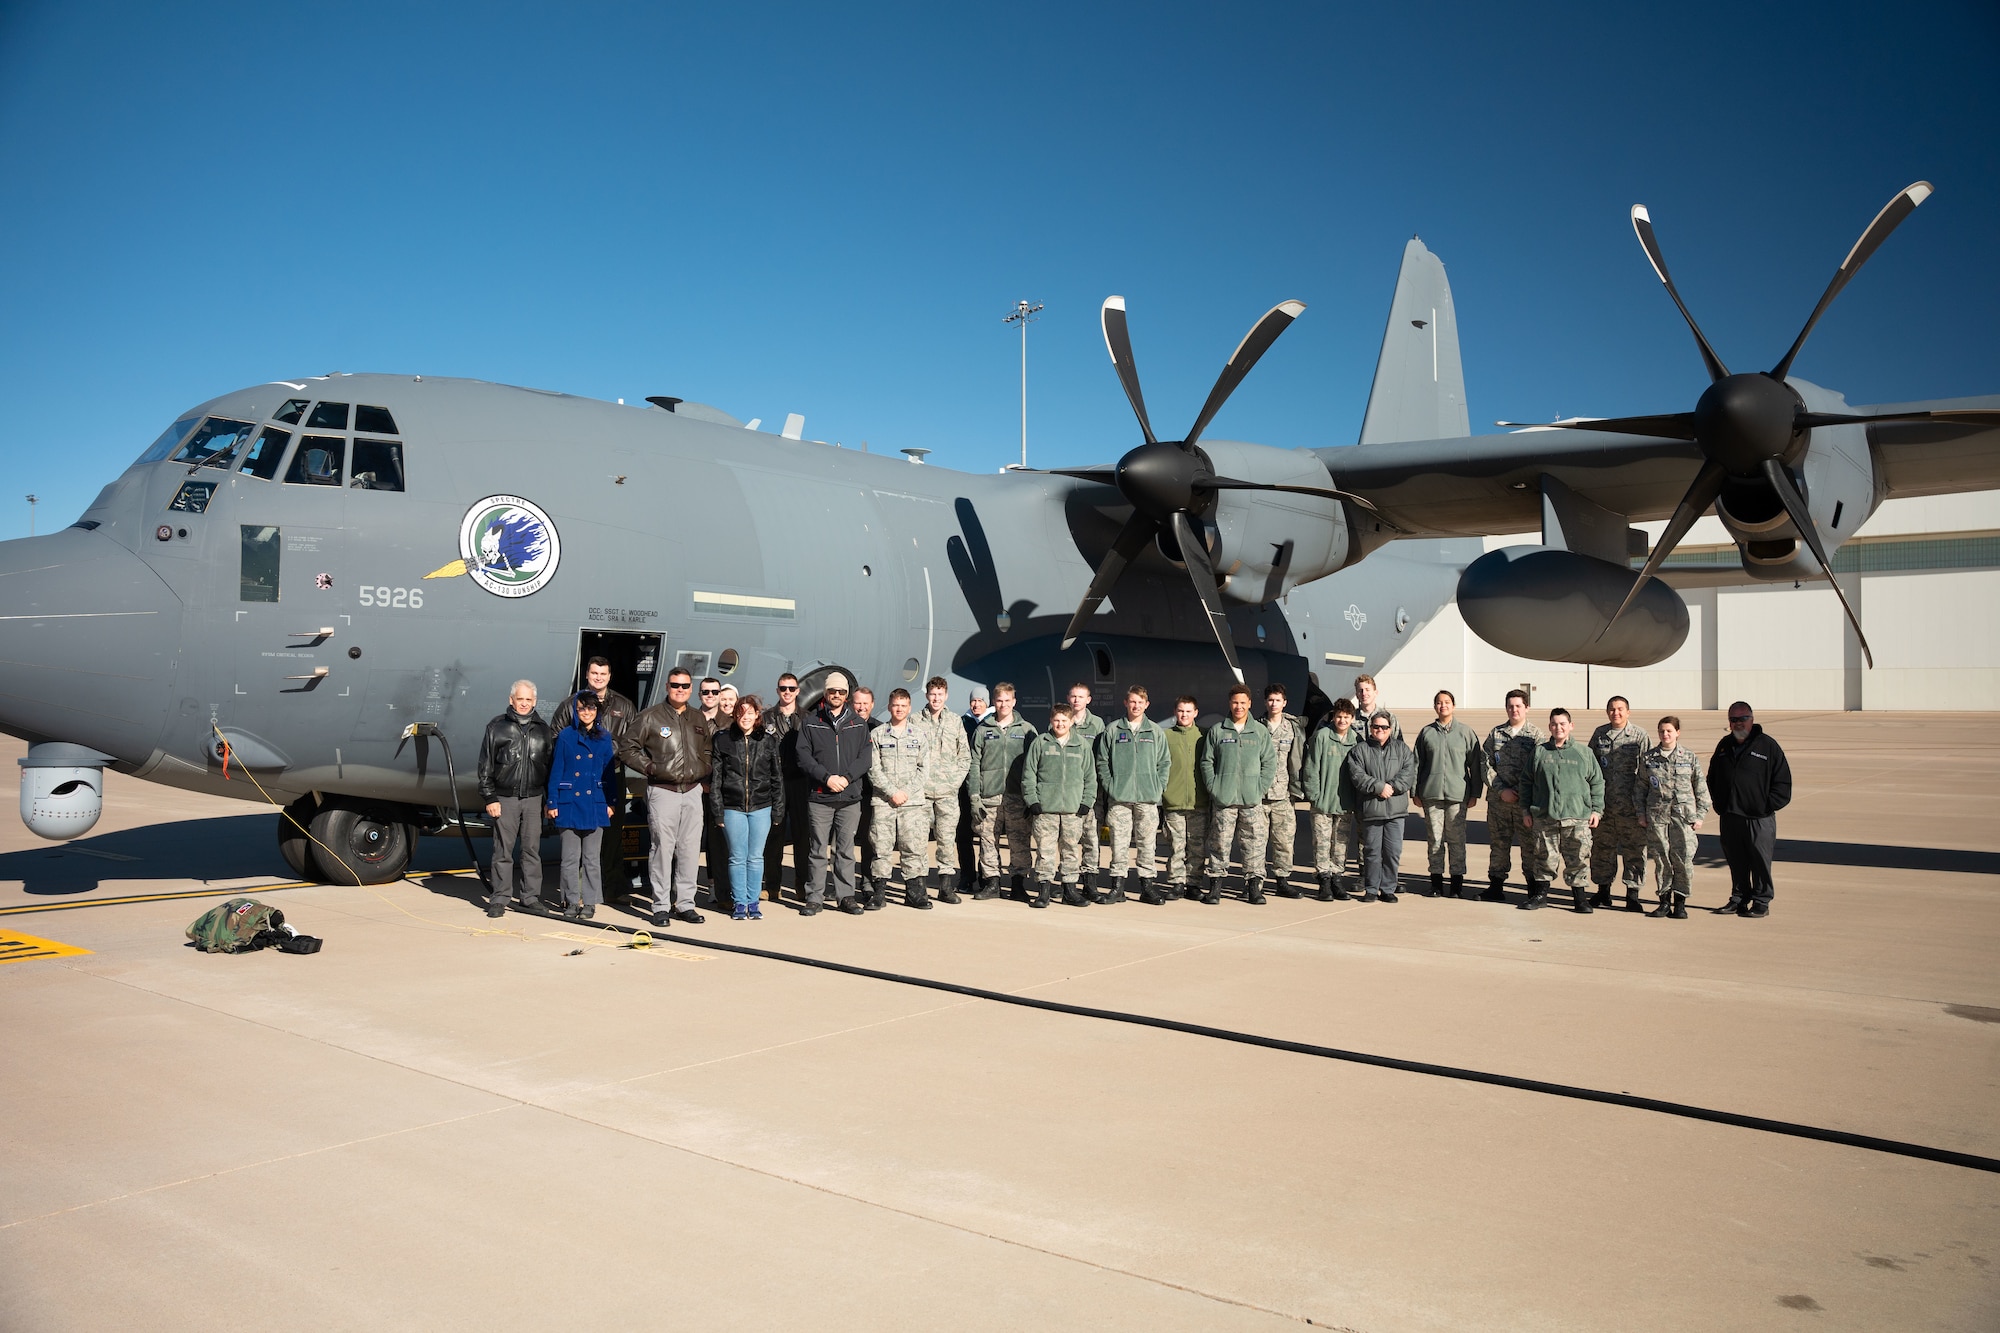 A group of young adults and adults in a mixture of military uniform and casual civilian attire stand in front of a military aircraft outside for a group photo.